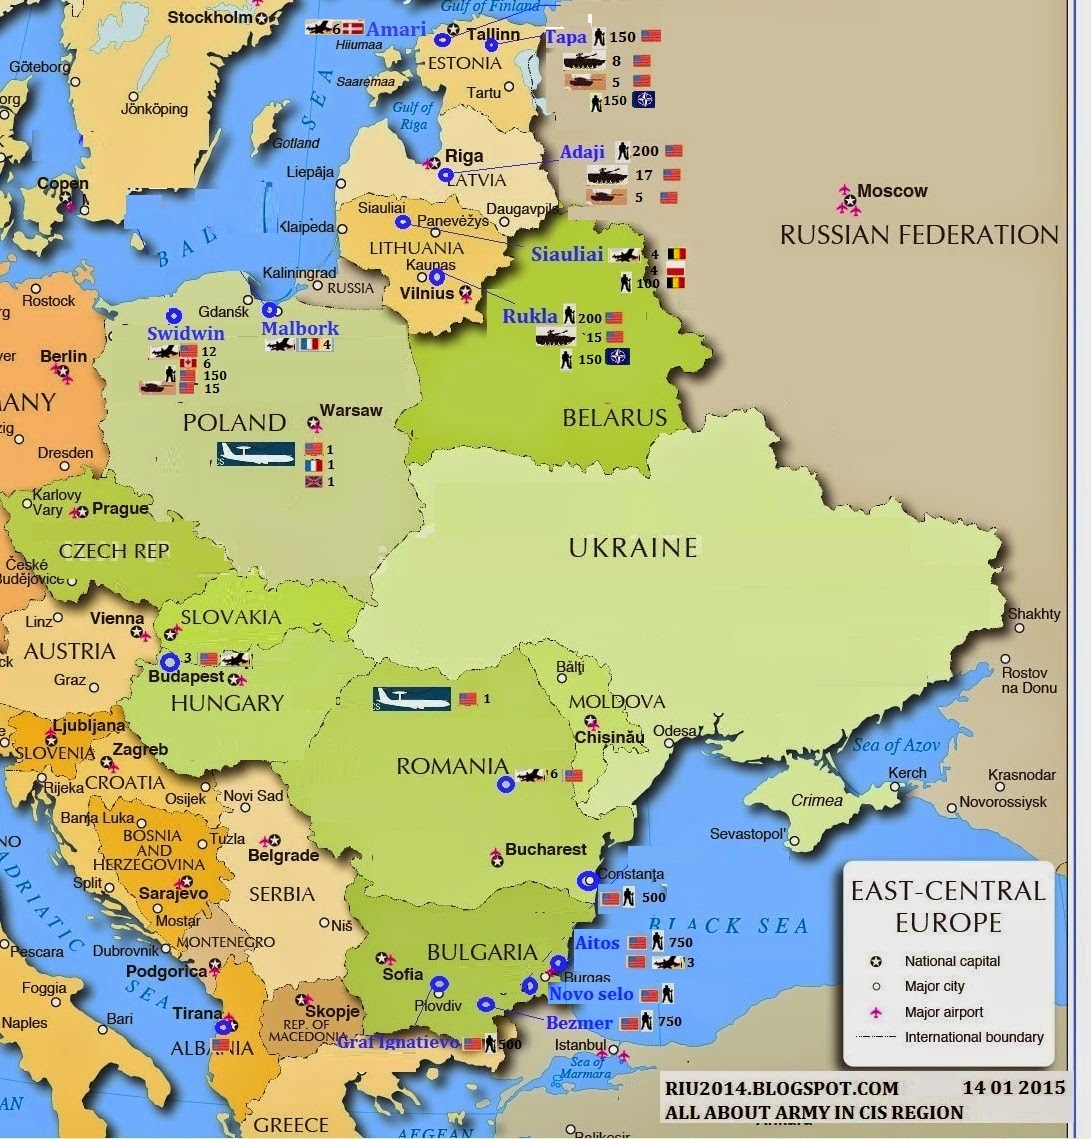 Armed Forces in Eurasia NATO bases in East Europe